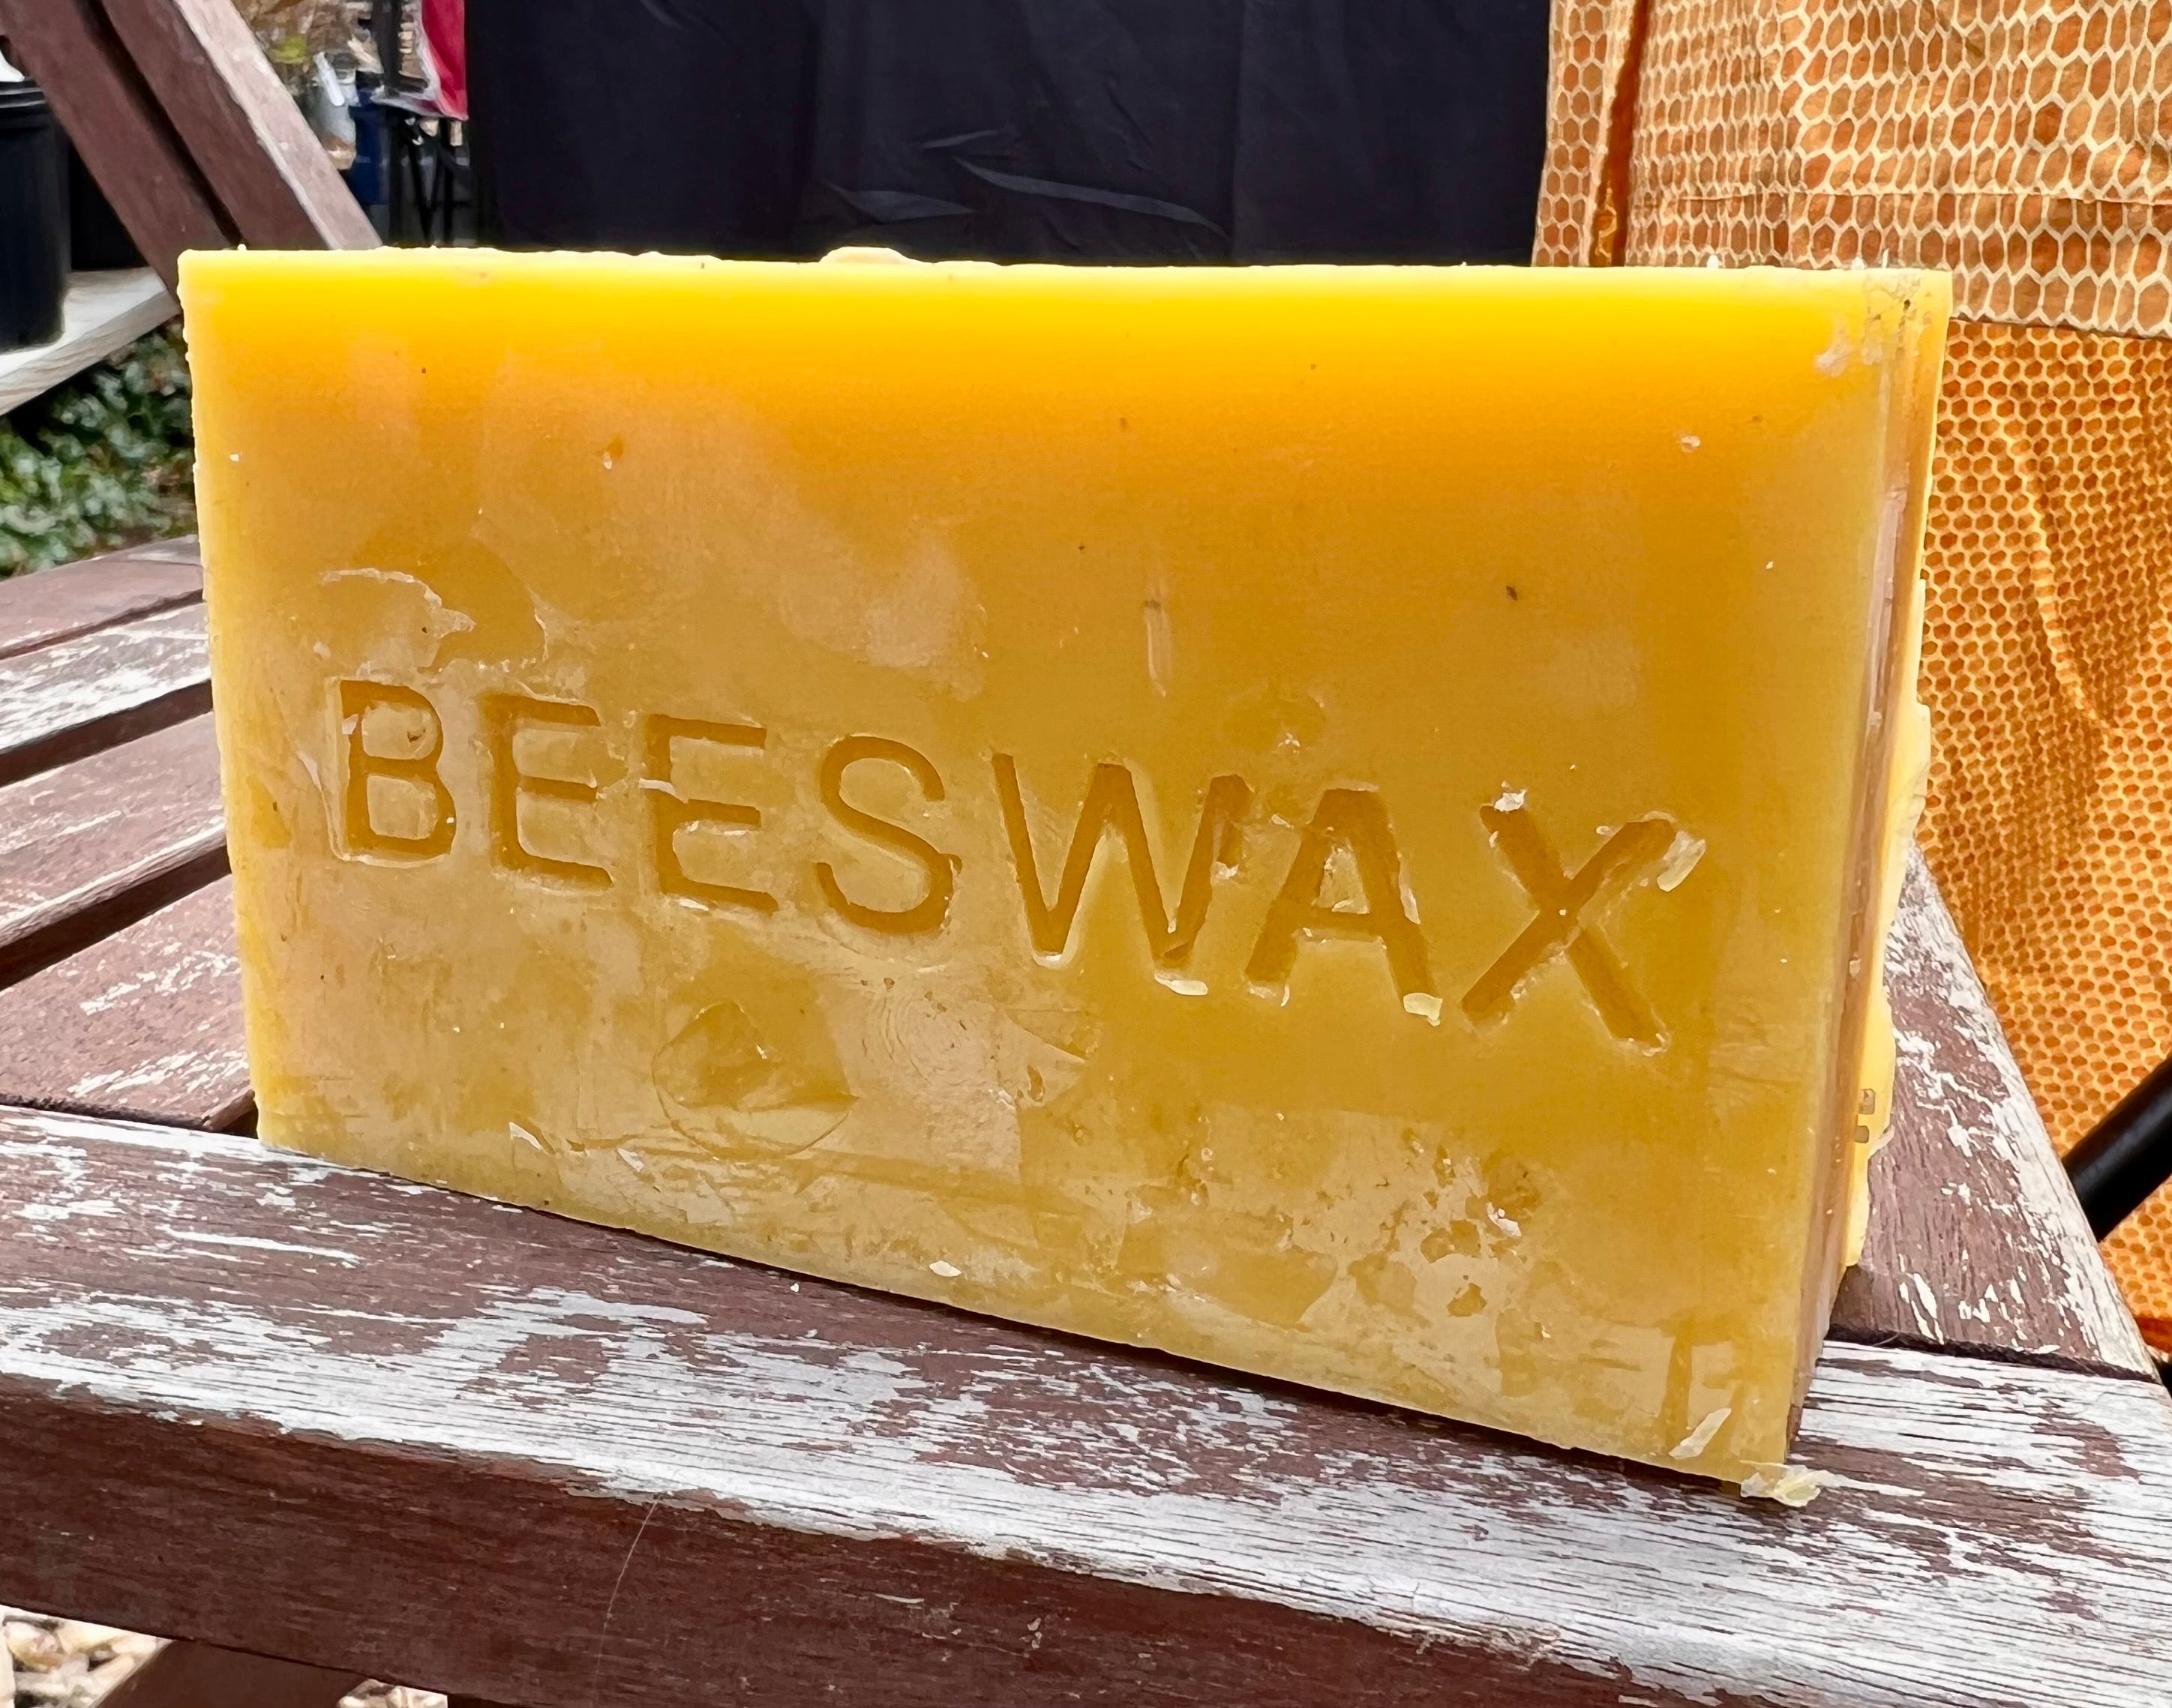 Beeswax – Carriage House Hives